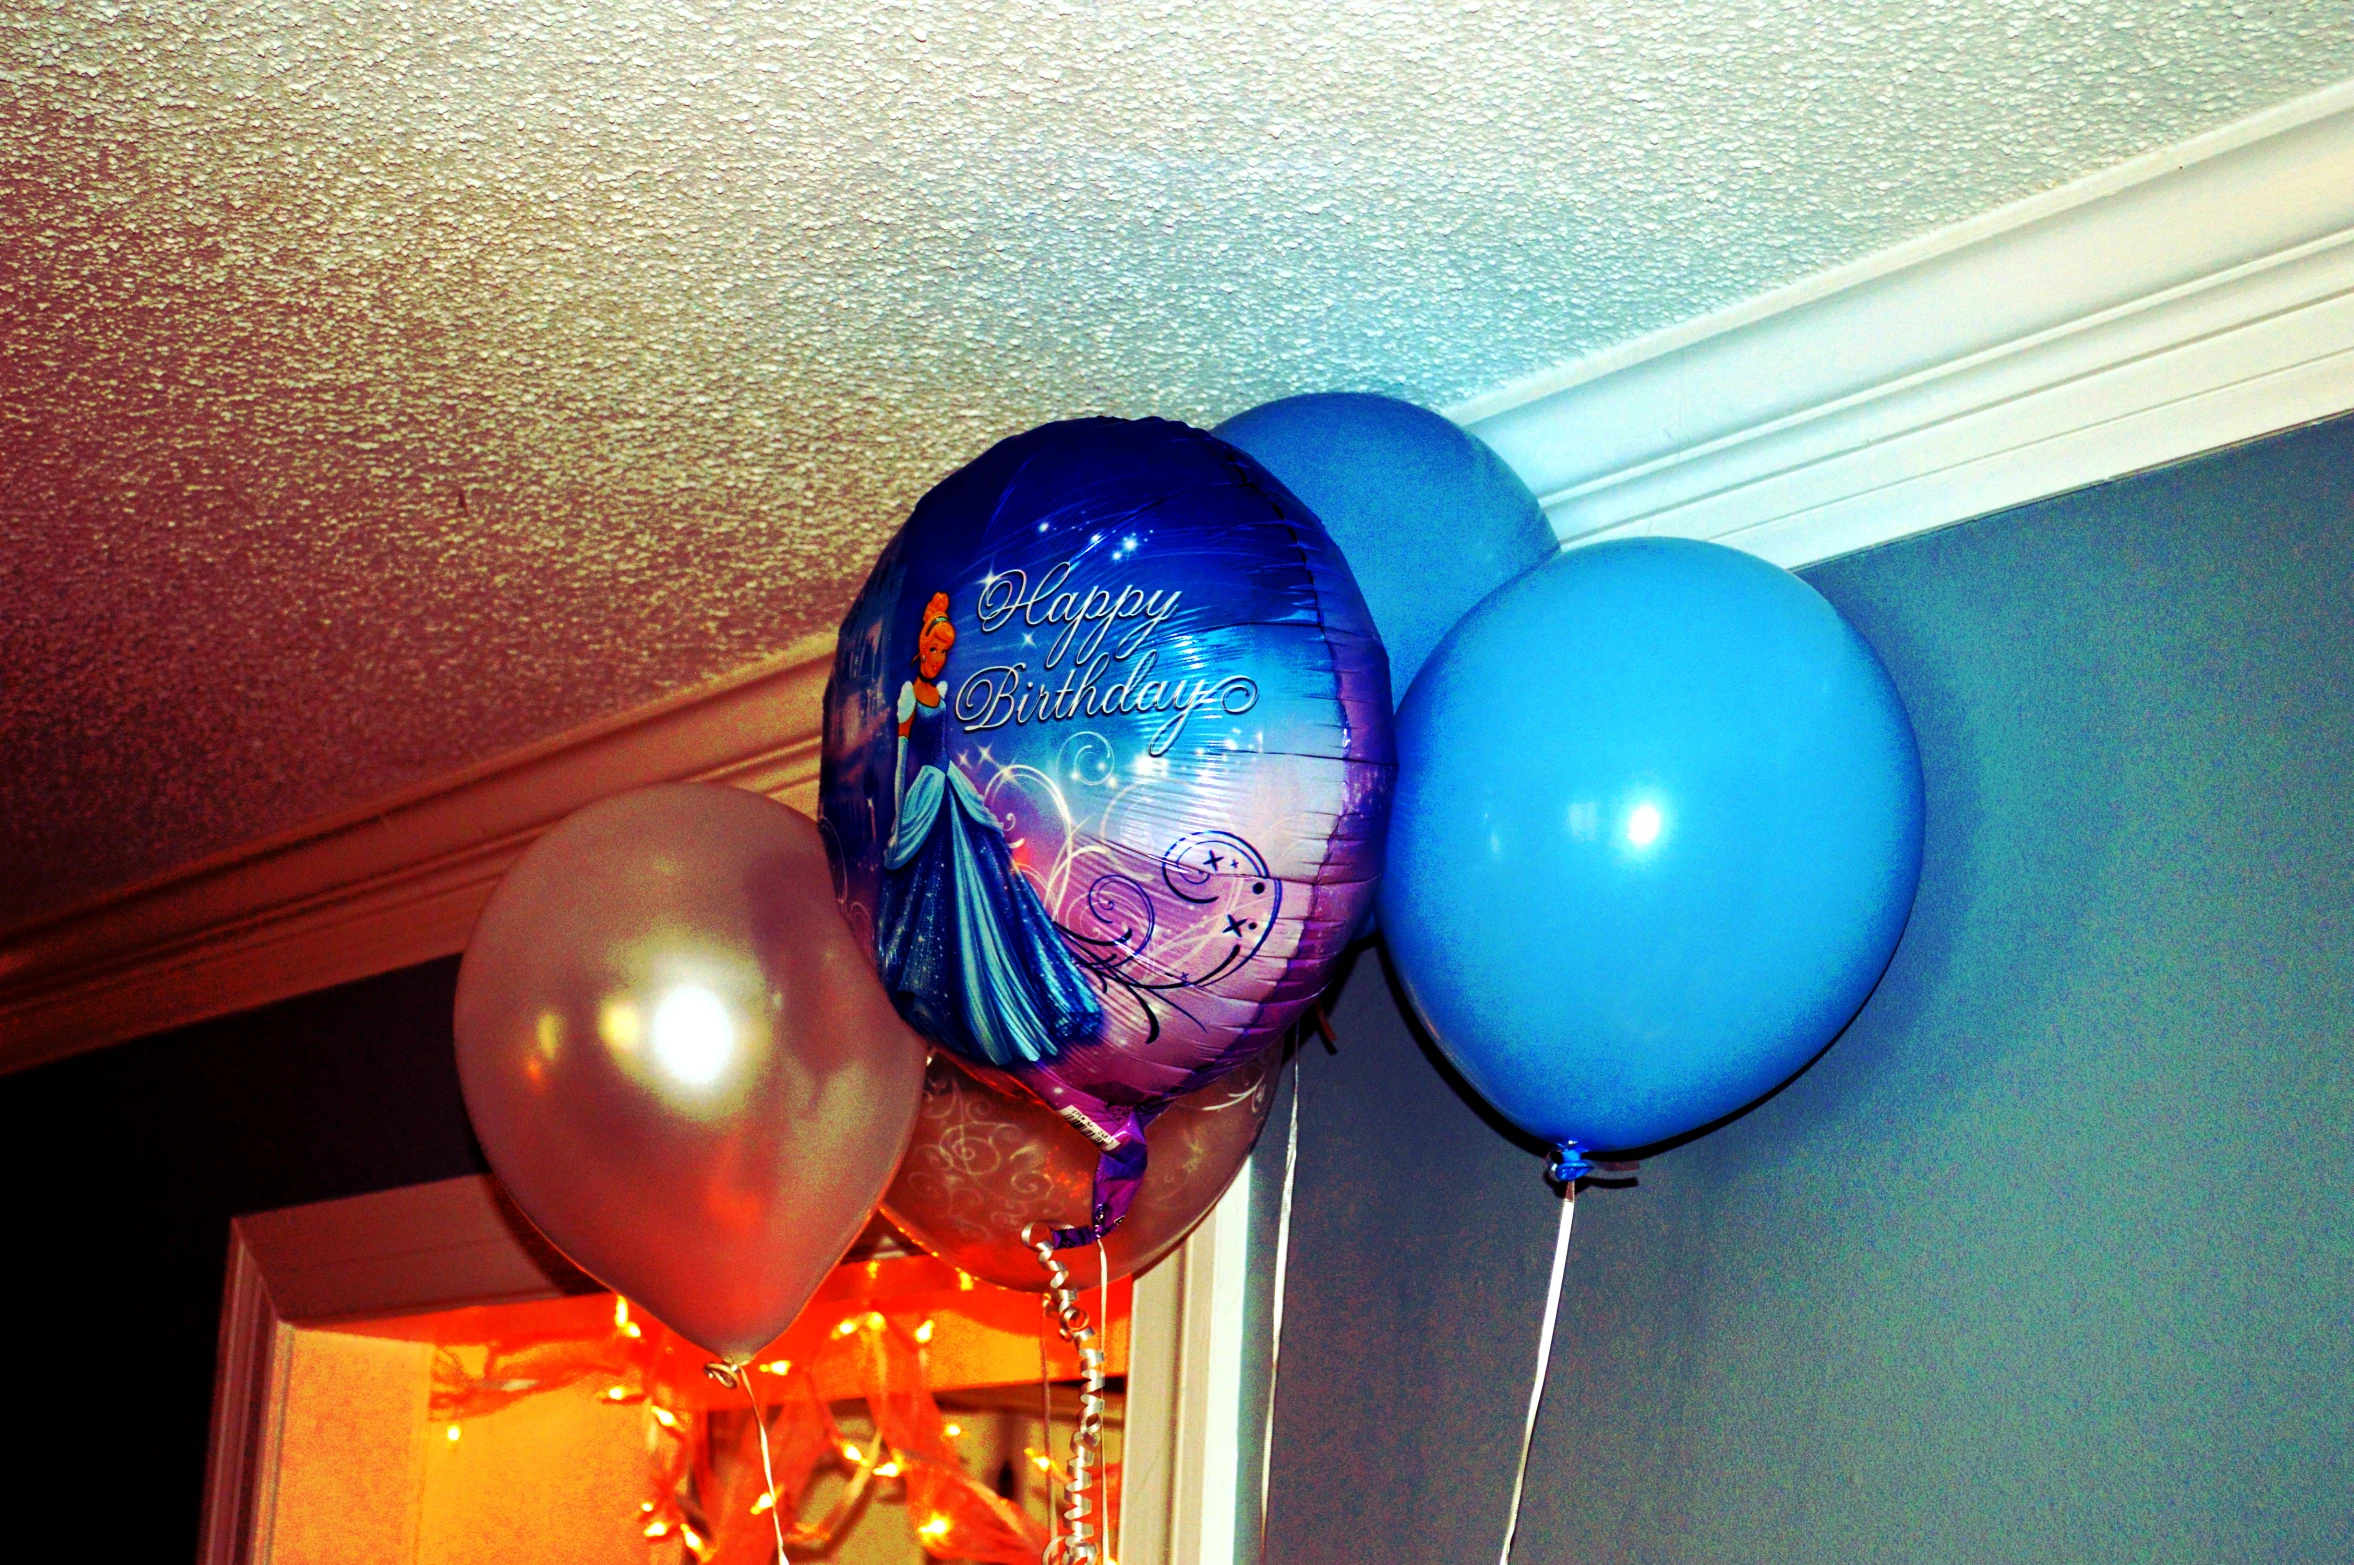 blue, white and tan balloons with a mermaid design hanging from the ceiling